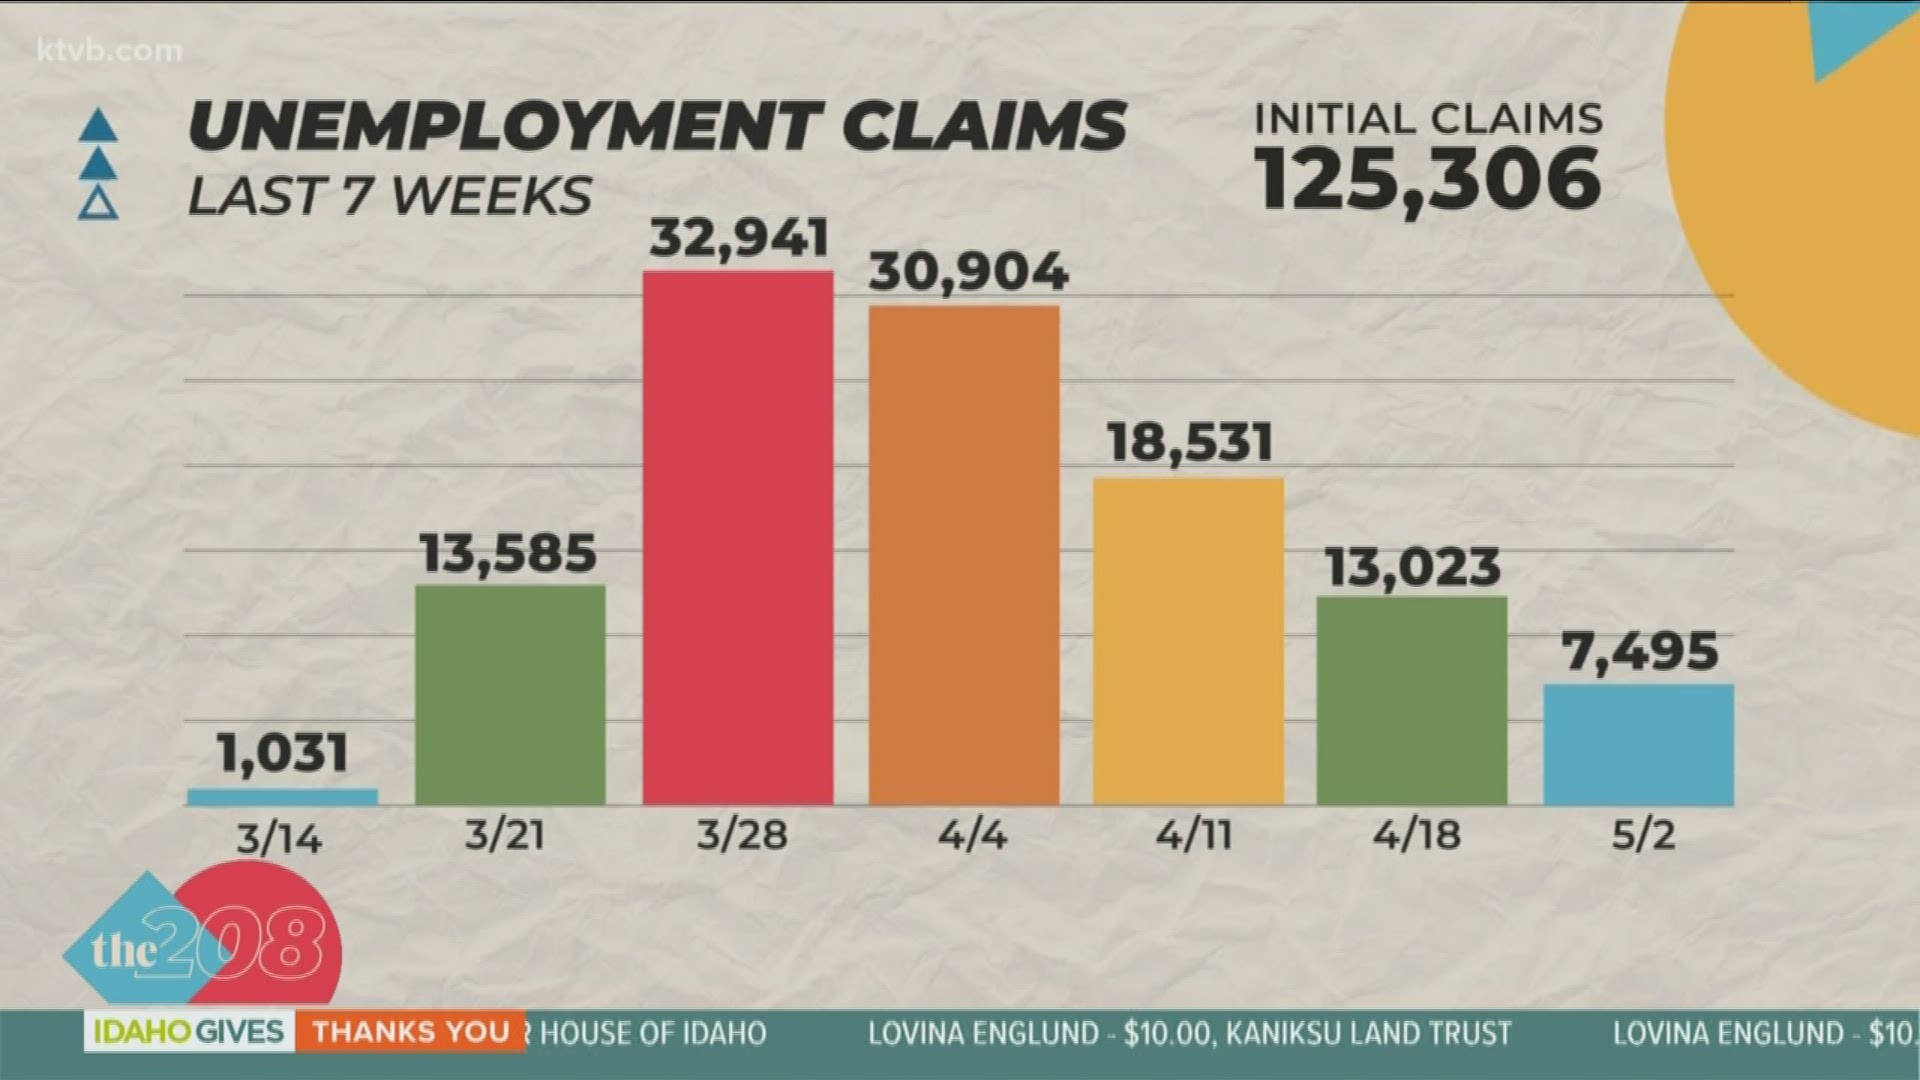 The department says the number of laid-off workers in the last seven weeks is more than double the total number of claims filed in all of 2019.